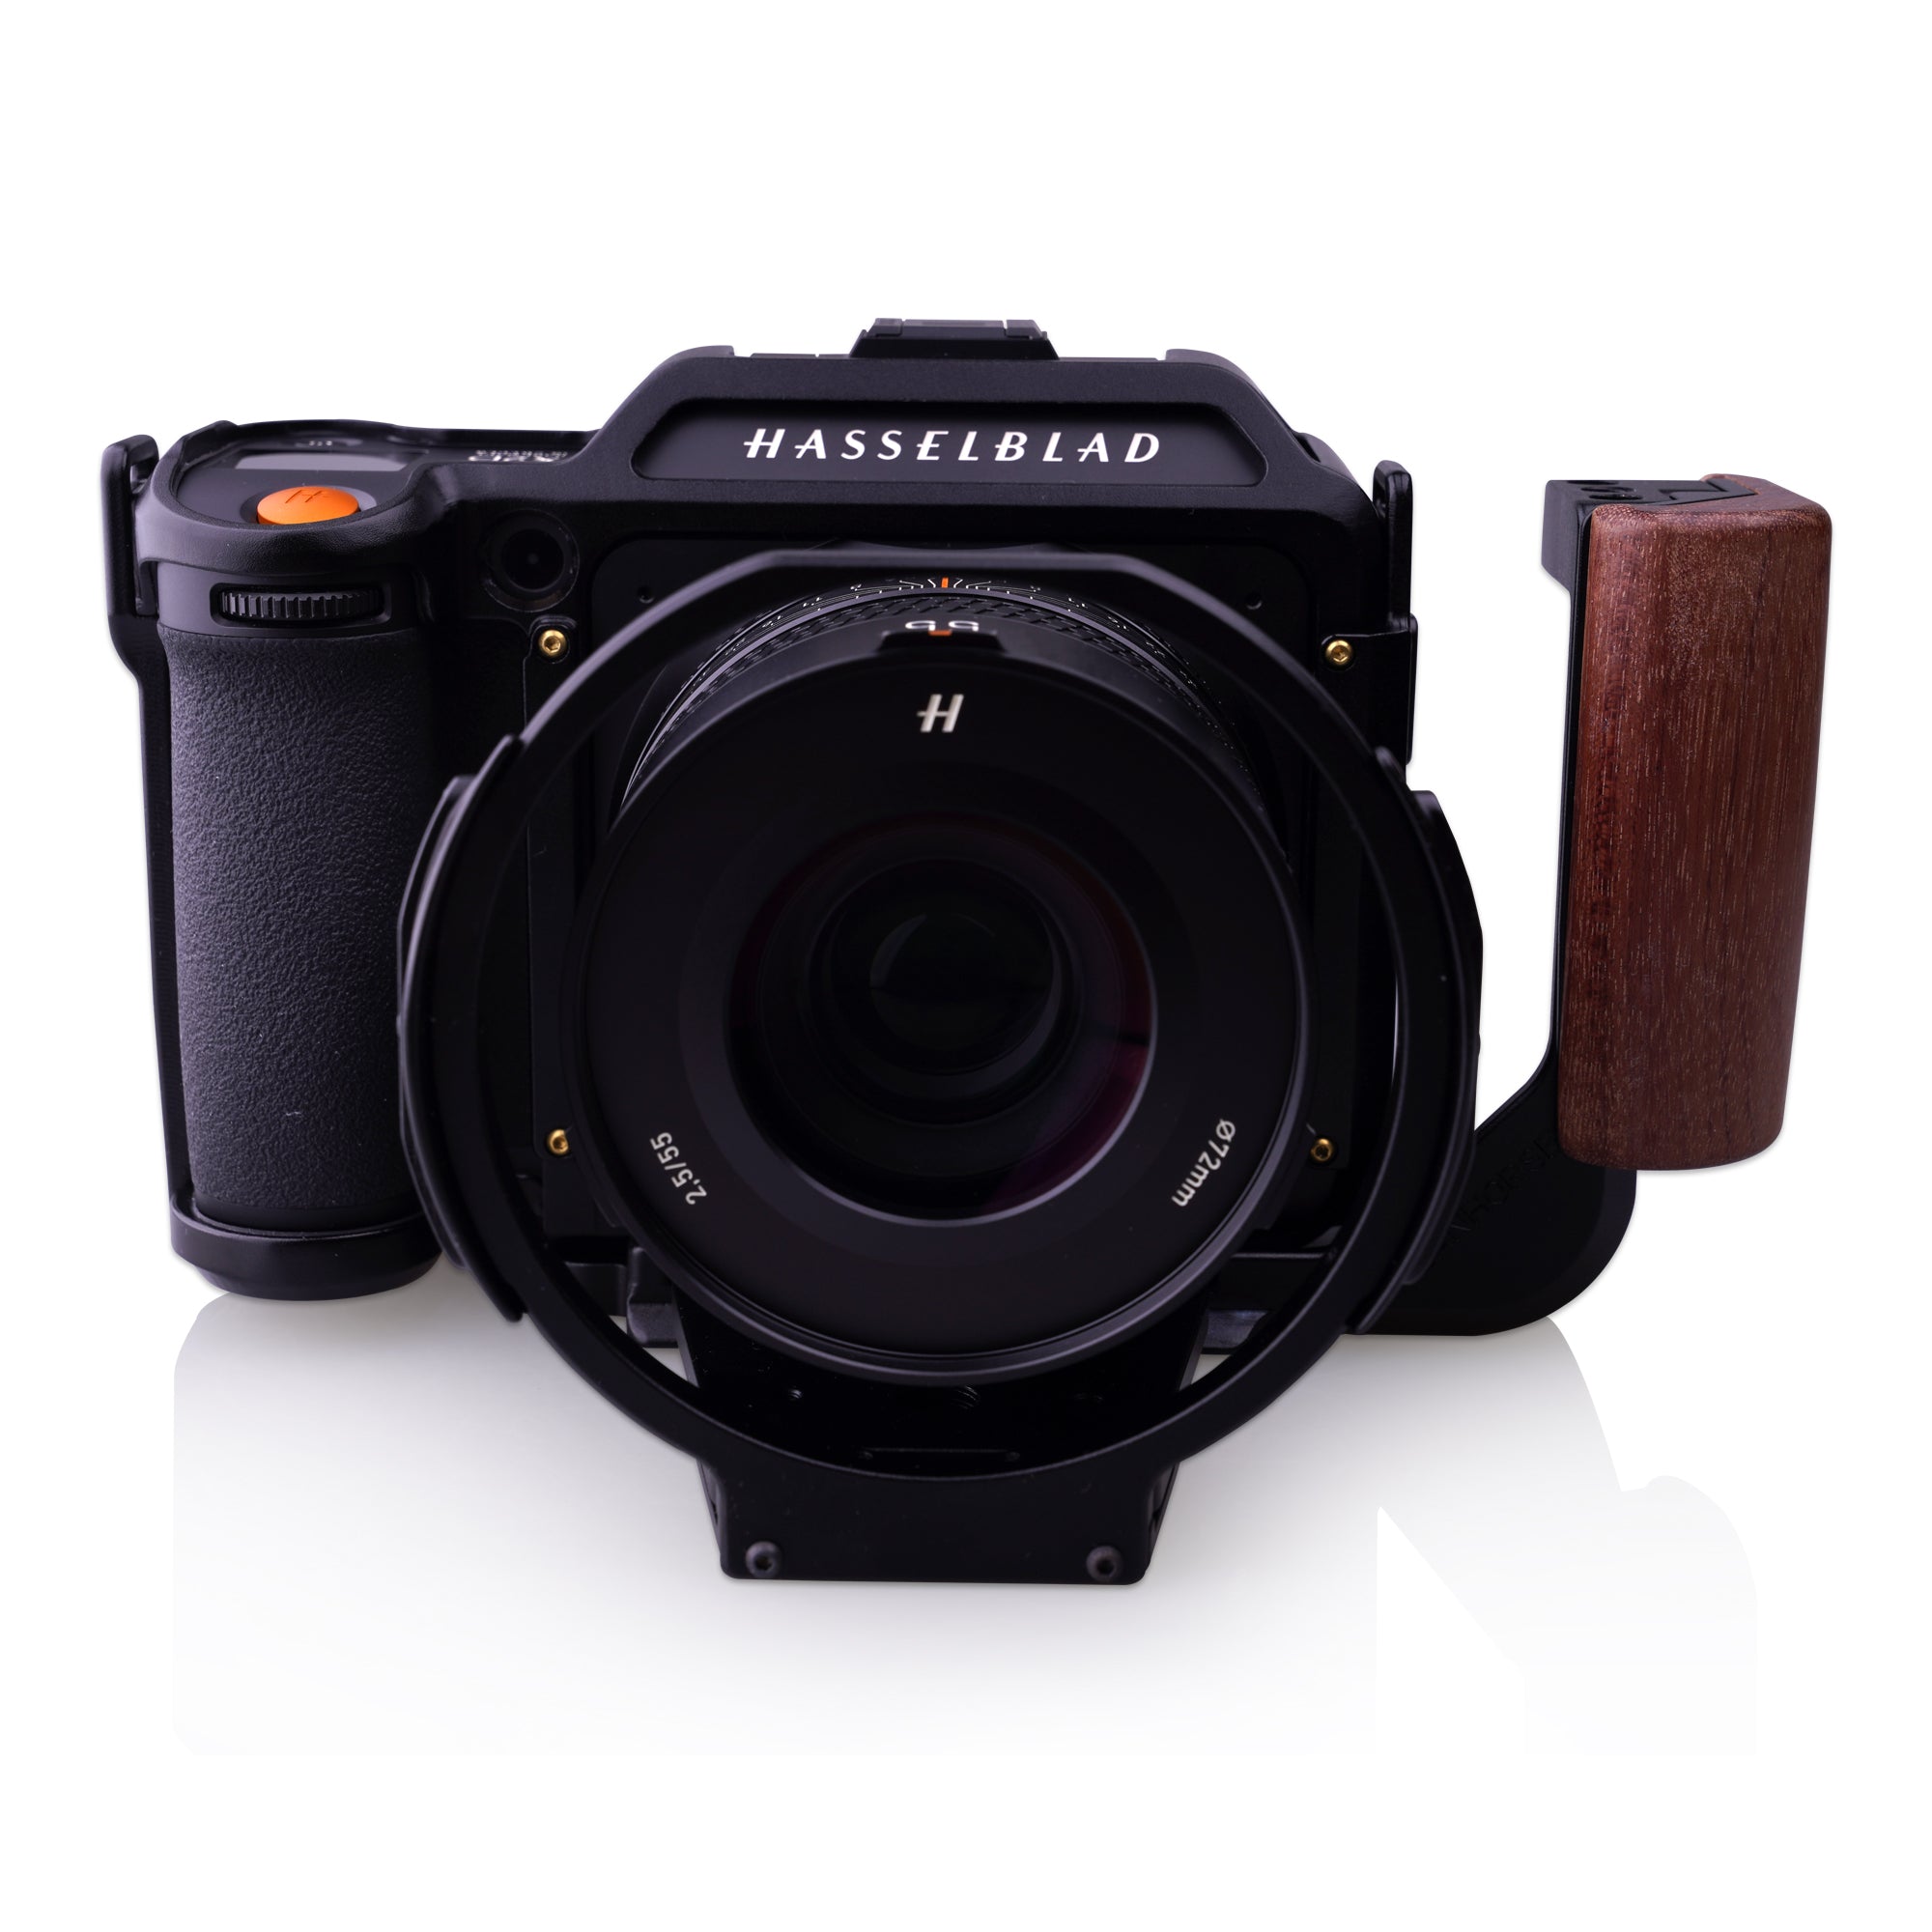 Lanhorse Modular Cage and Handgrip for Hasselblad X2D 100C, Lens Protector  Frame Options.